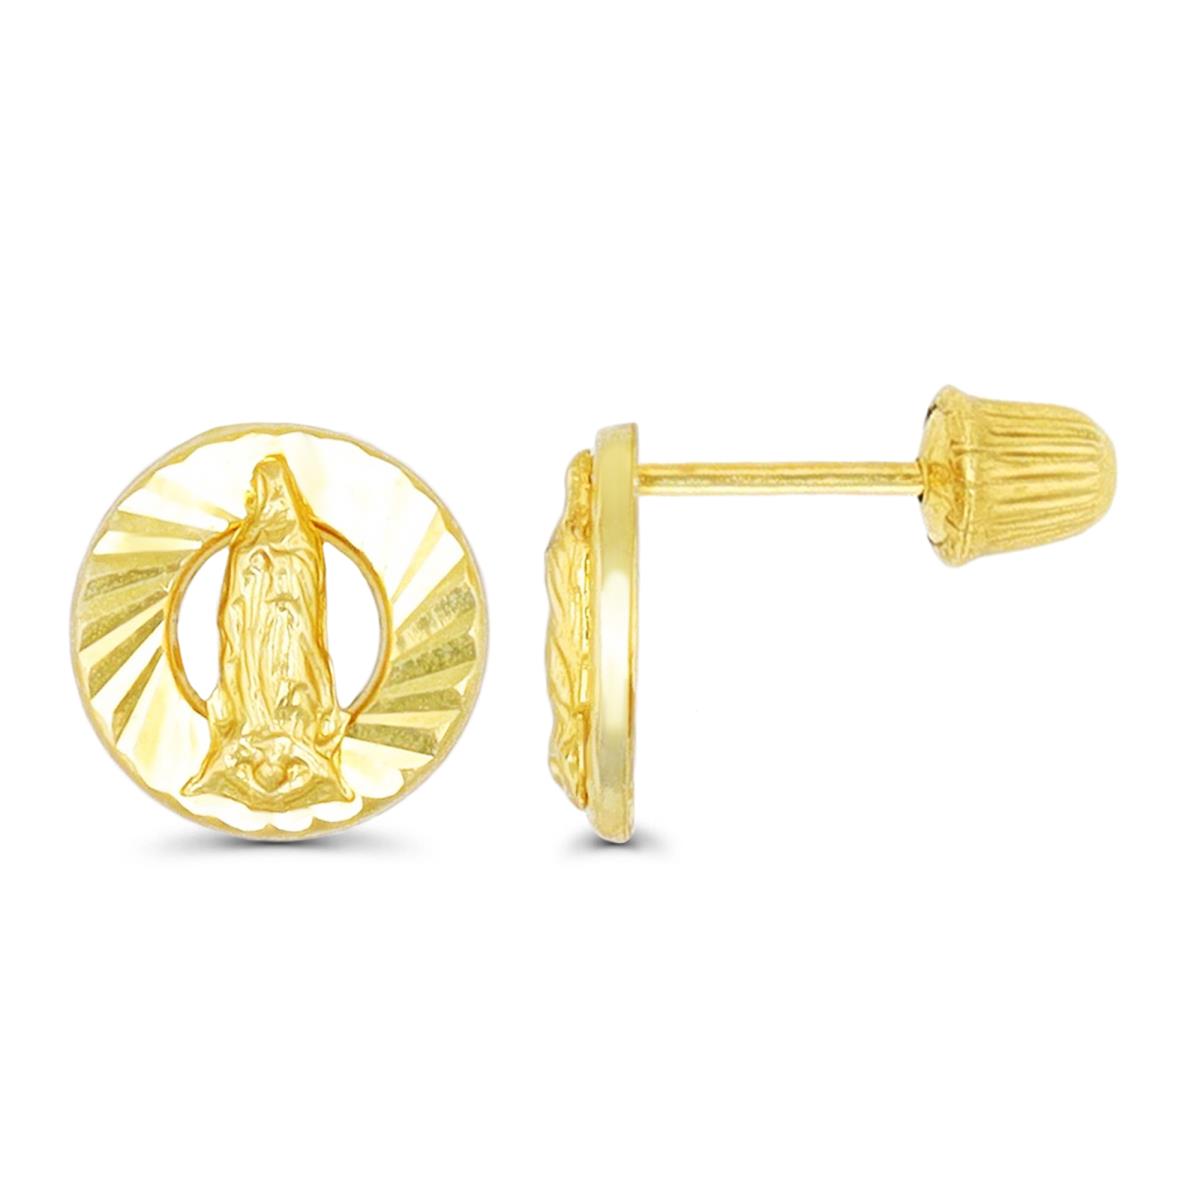 10K Yellow Gold Diamond Cut Our Lady of Guadalupe Hat Screw Back Stud Earring